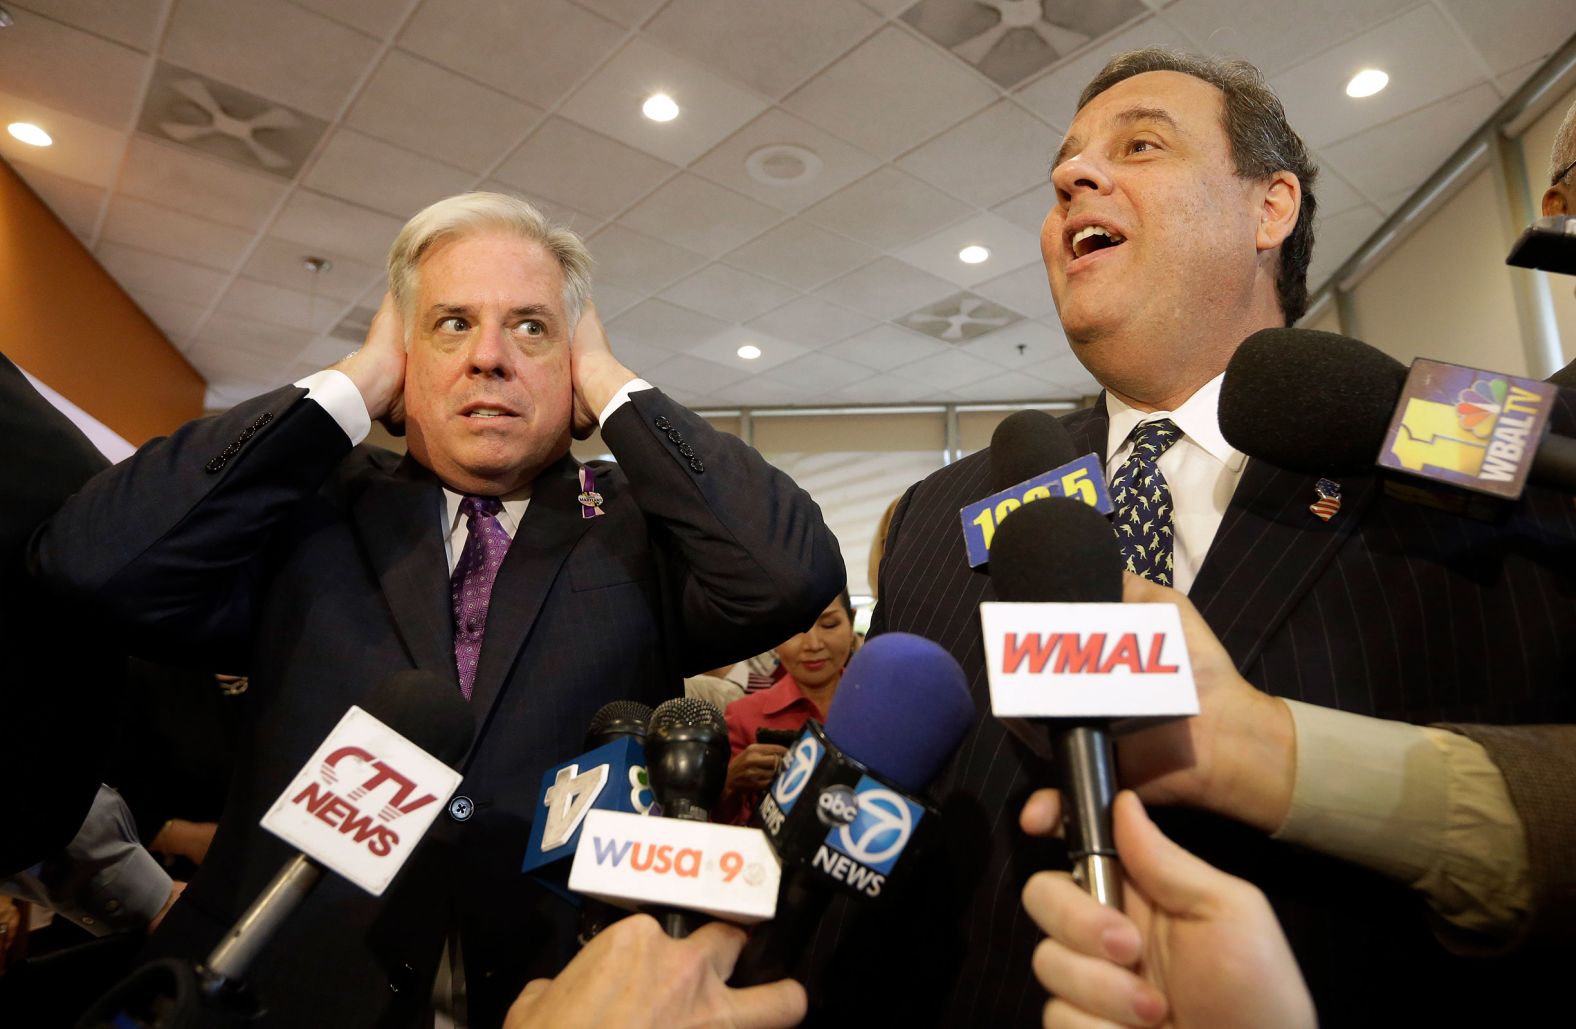 Larry Hogan, who at the time was running for governor of Maryland, pretends not to hear Christie as he speaks to reporters in Bethesda, Maryland, in October 2014. Christie, as head of the Republican Governors Association, was in Maryland to help Hogan's campaign.